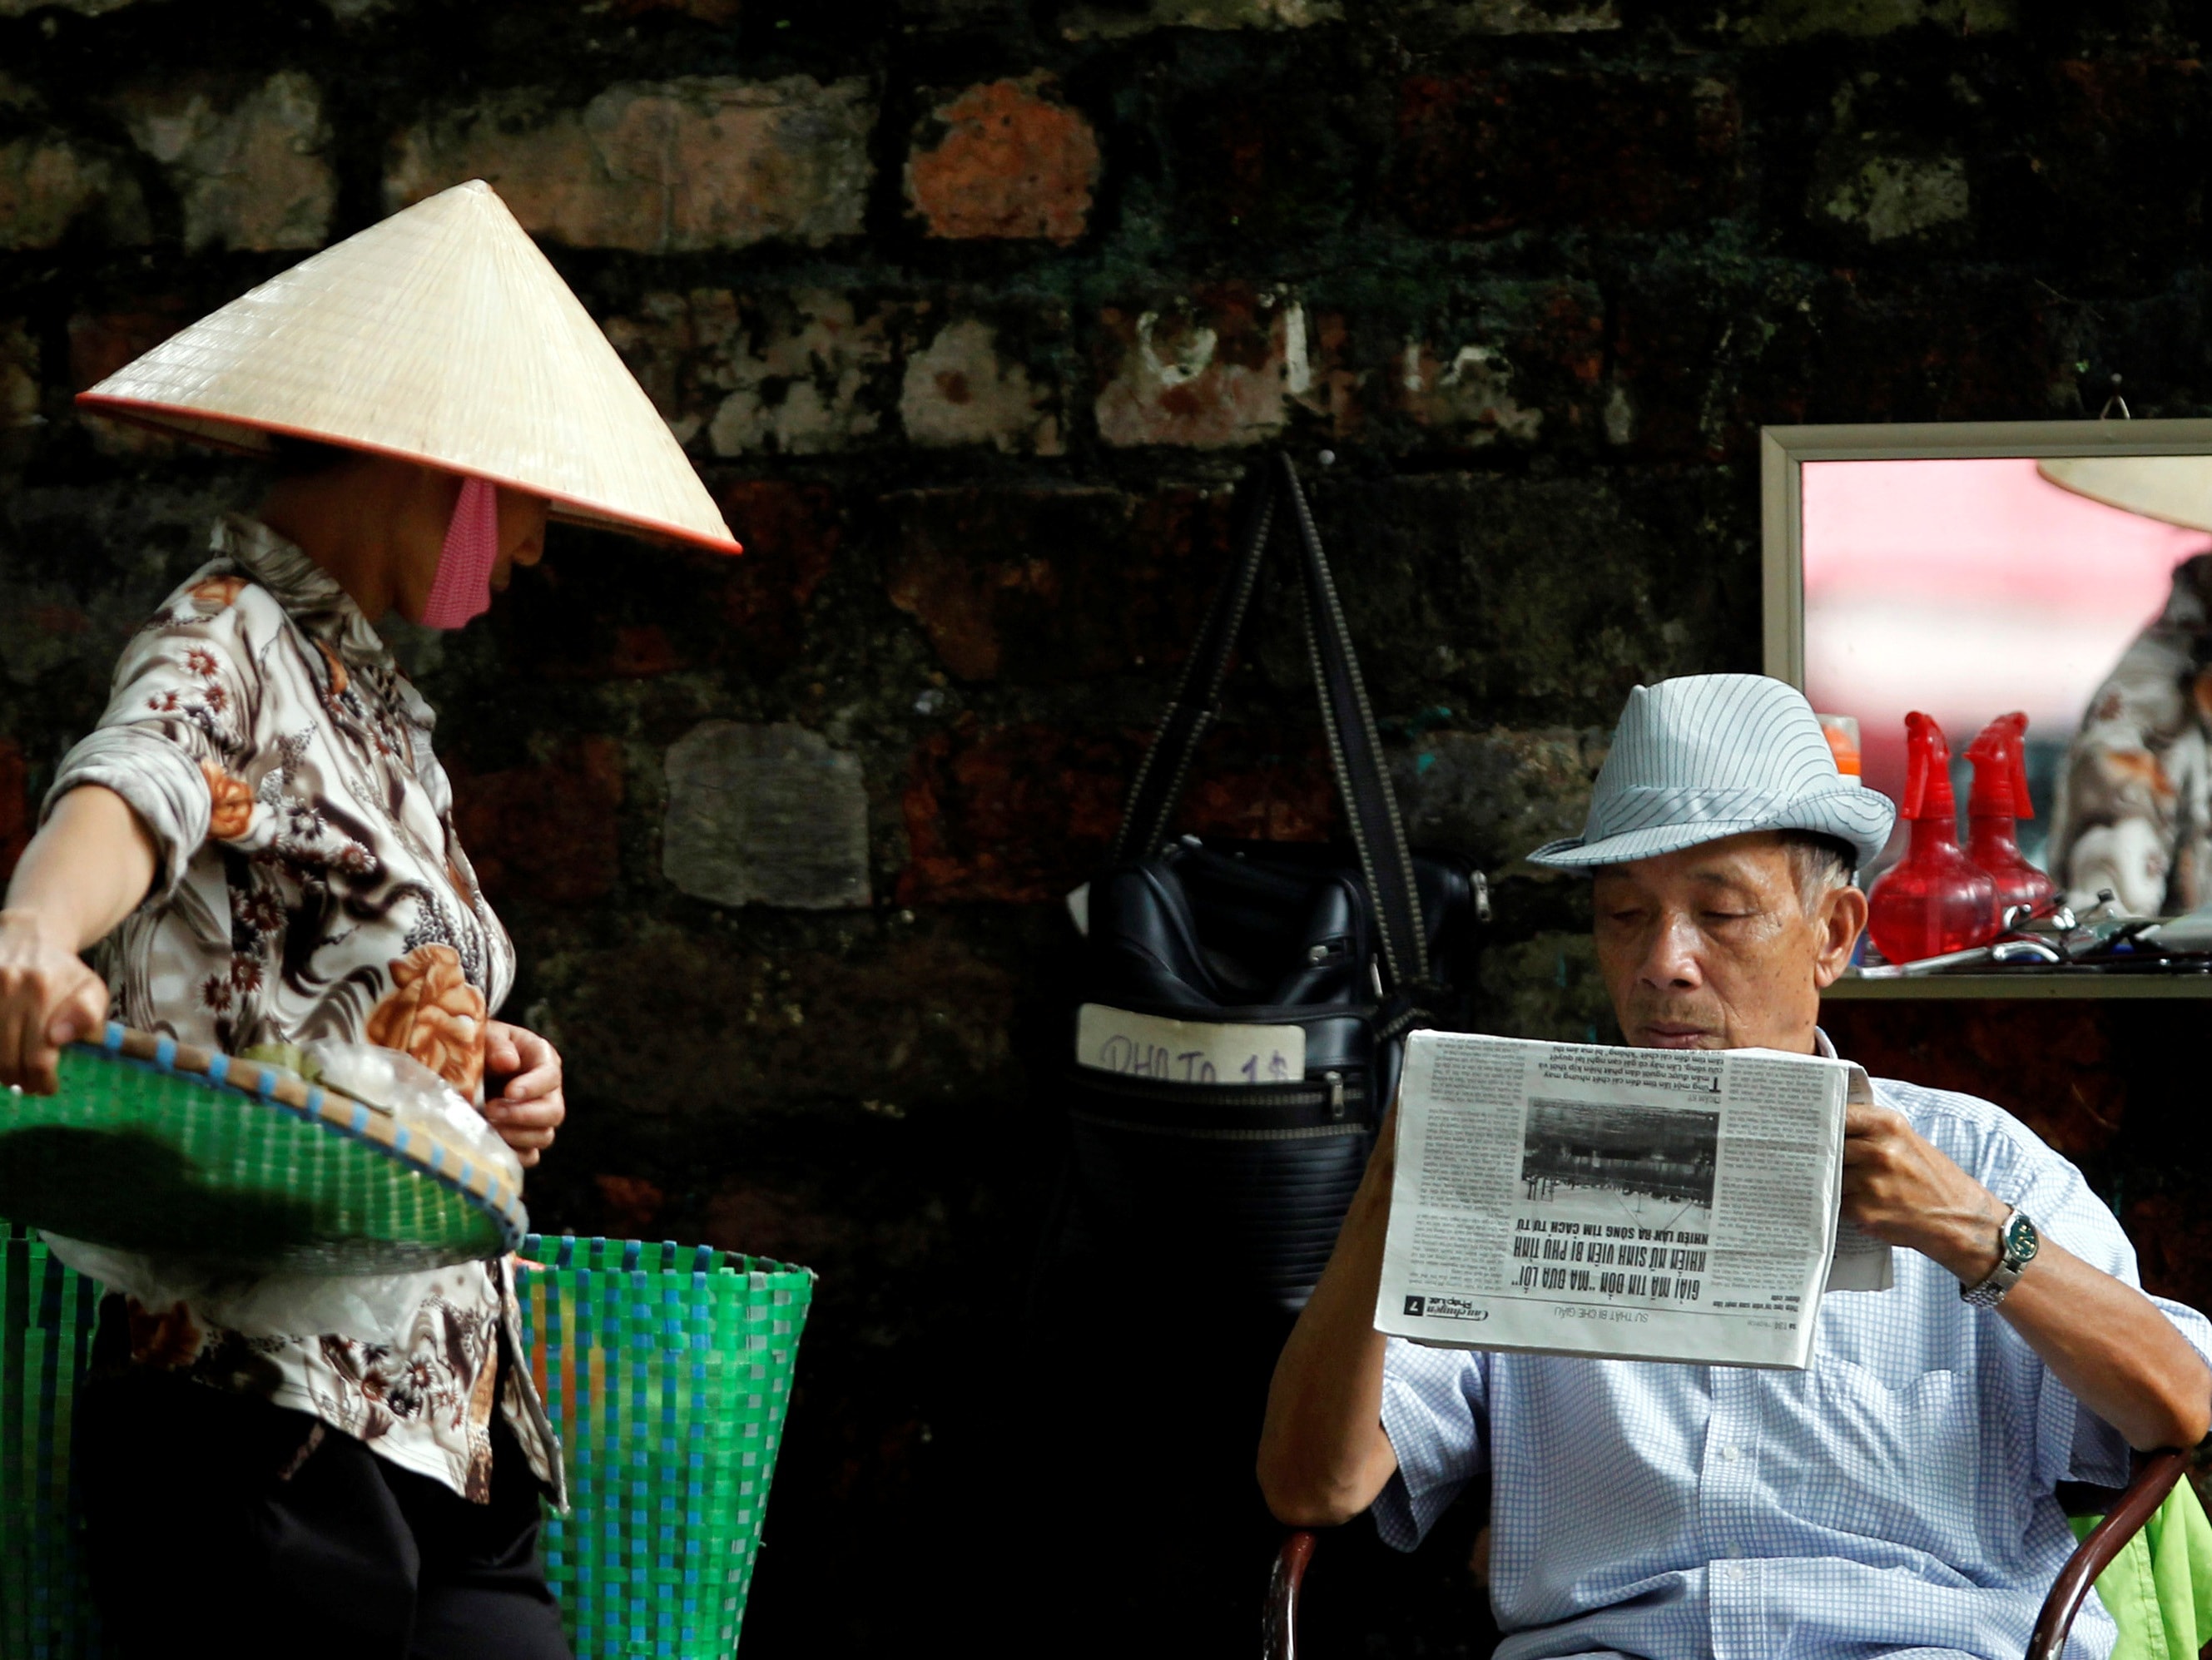 Street scene in Hanoi, 13 September 2013. RWB's report describes the absolute control that the party has exercised over the traditional media for decades, REUTERS/Kham